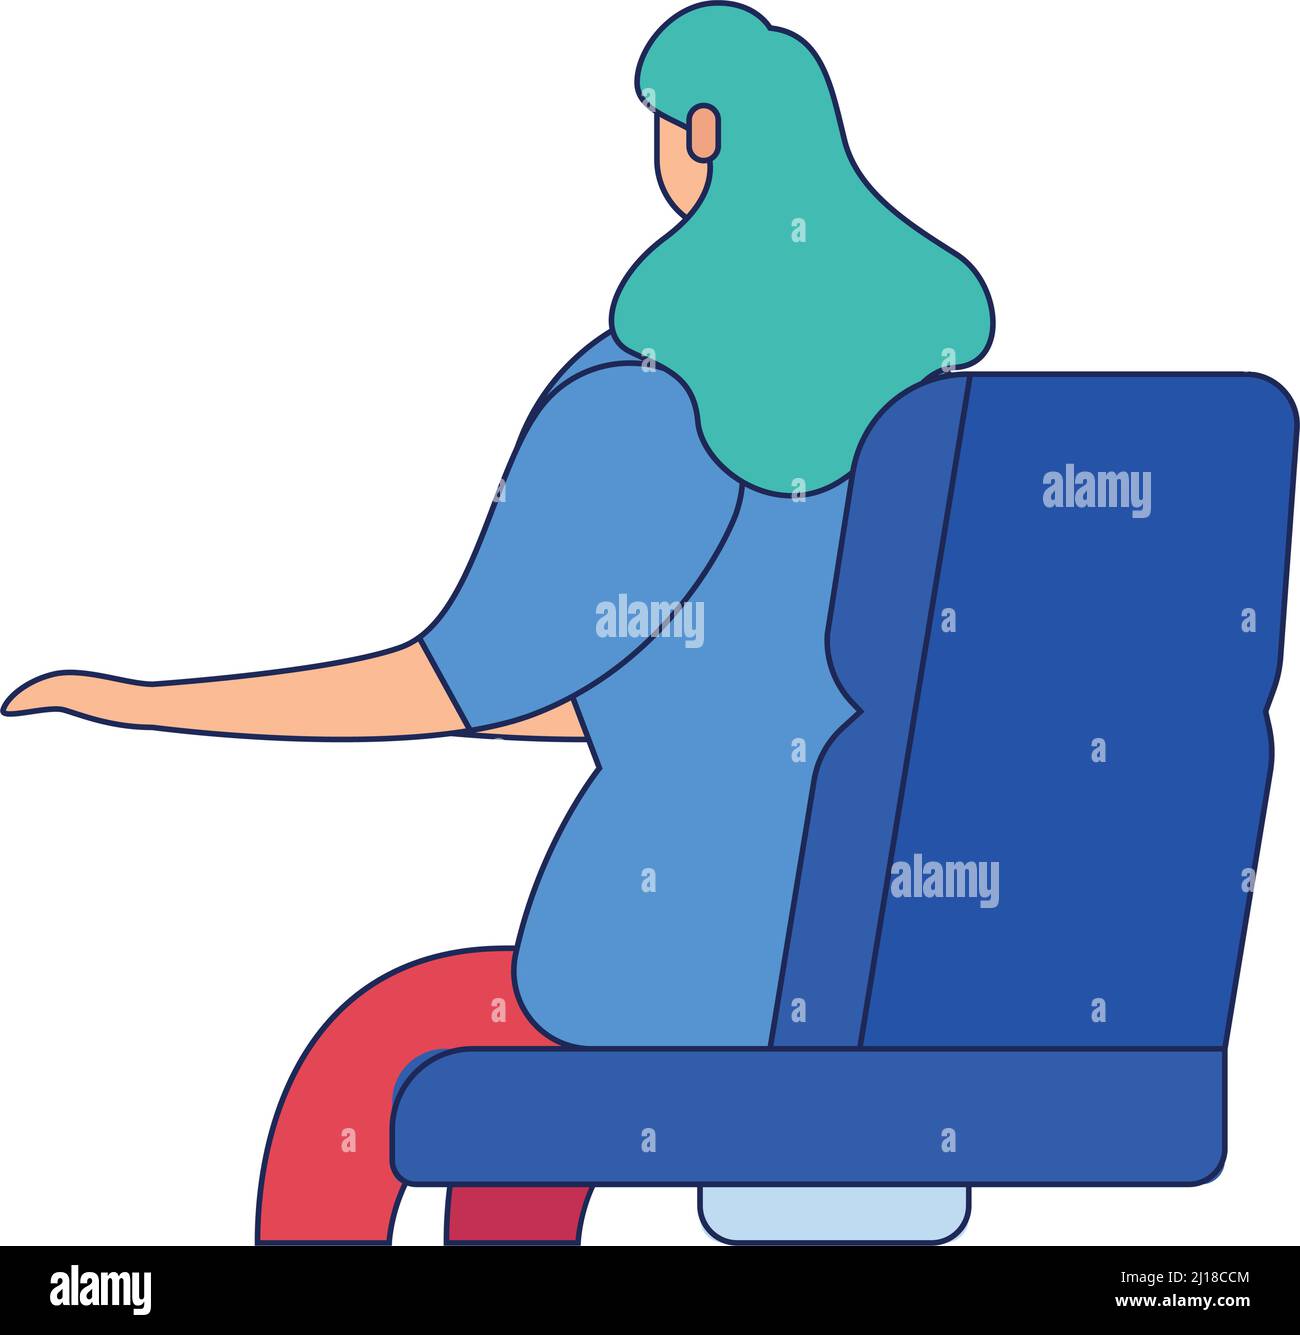 Isolated female character sitting on a chair flat design icon Vector ...